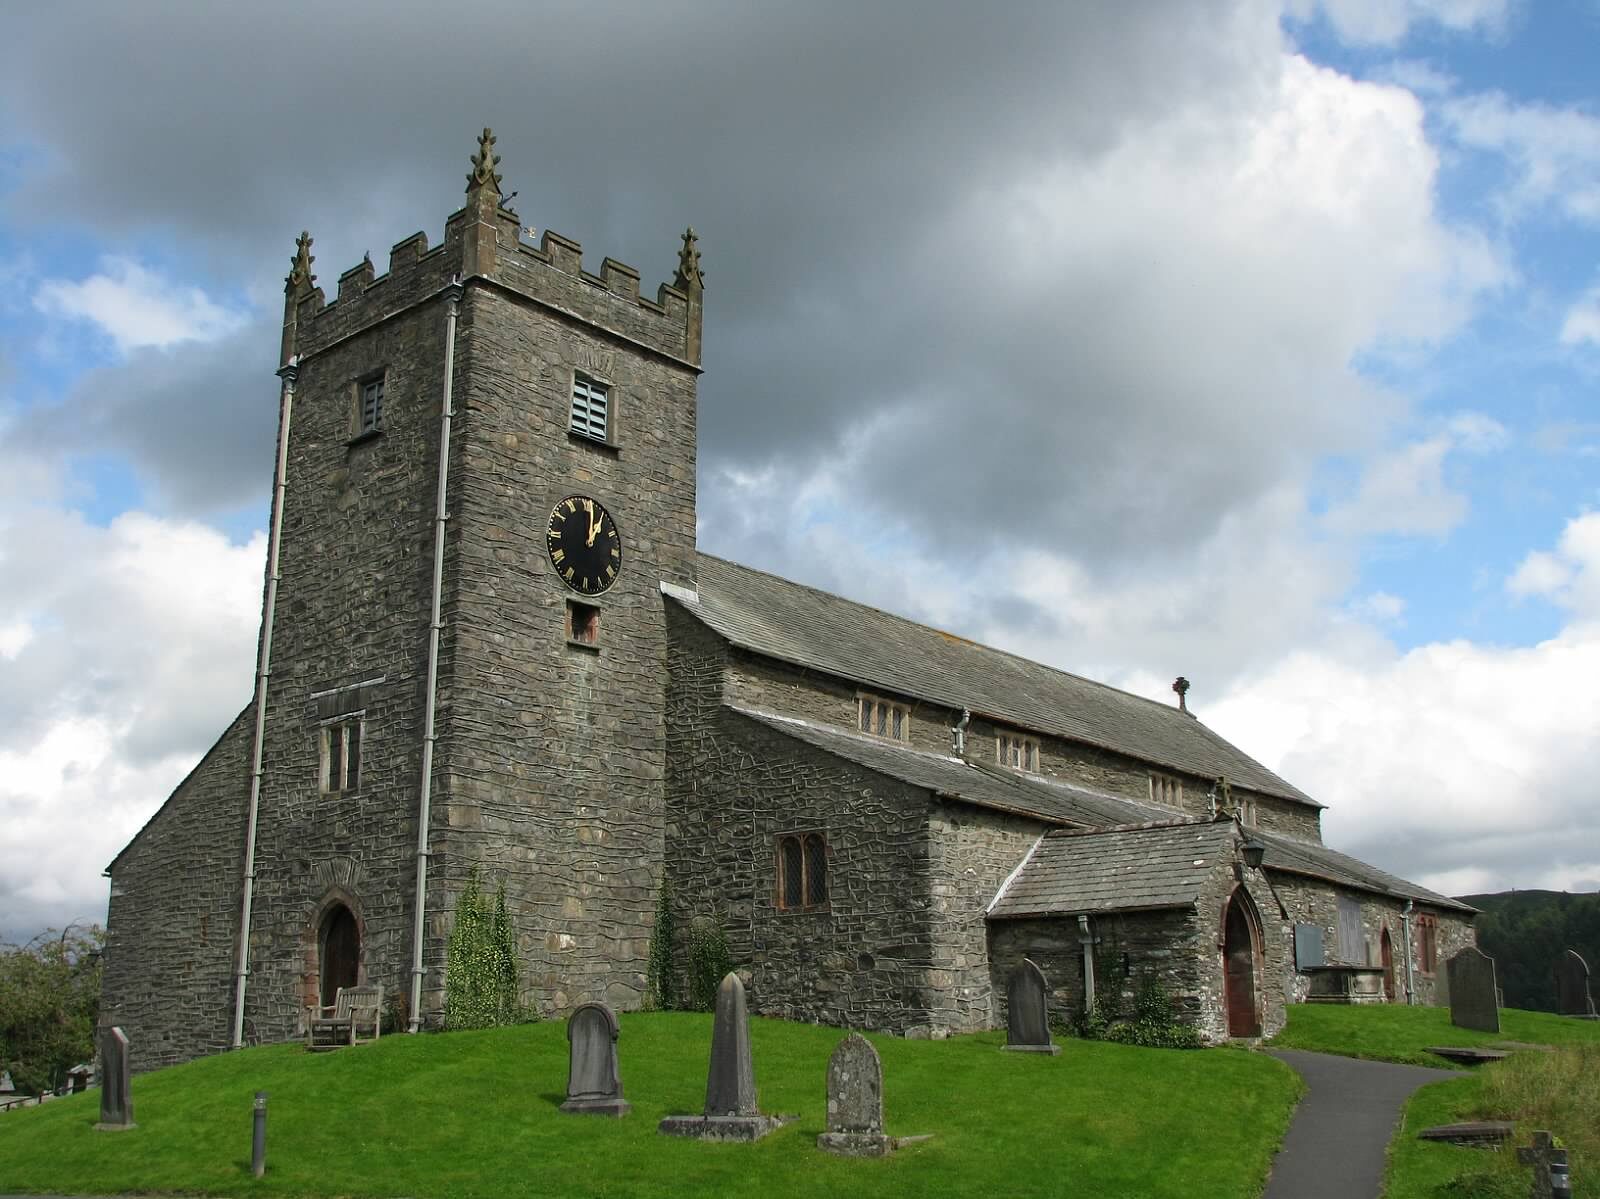 Image of church with a cloudy blue sky and green churchyard.